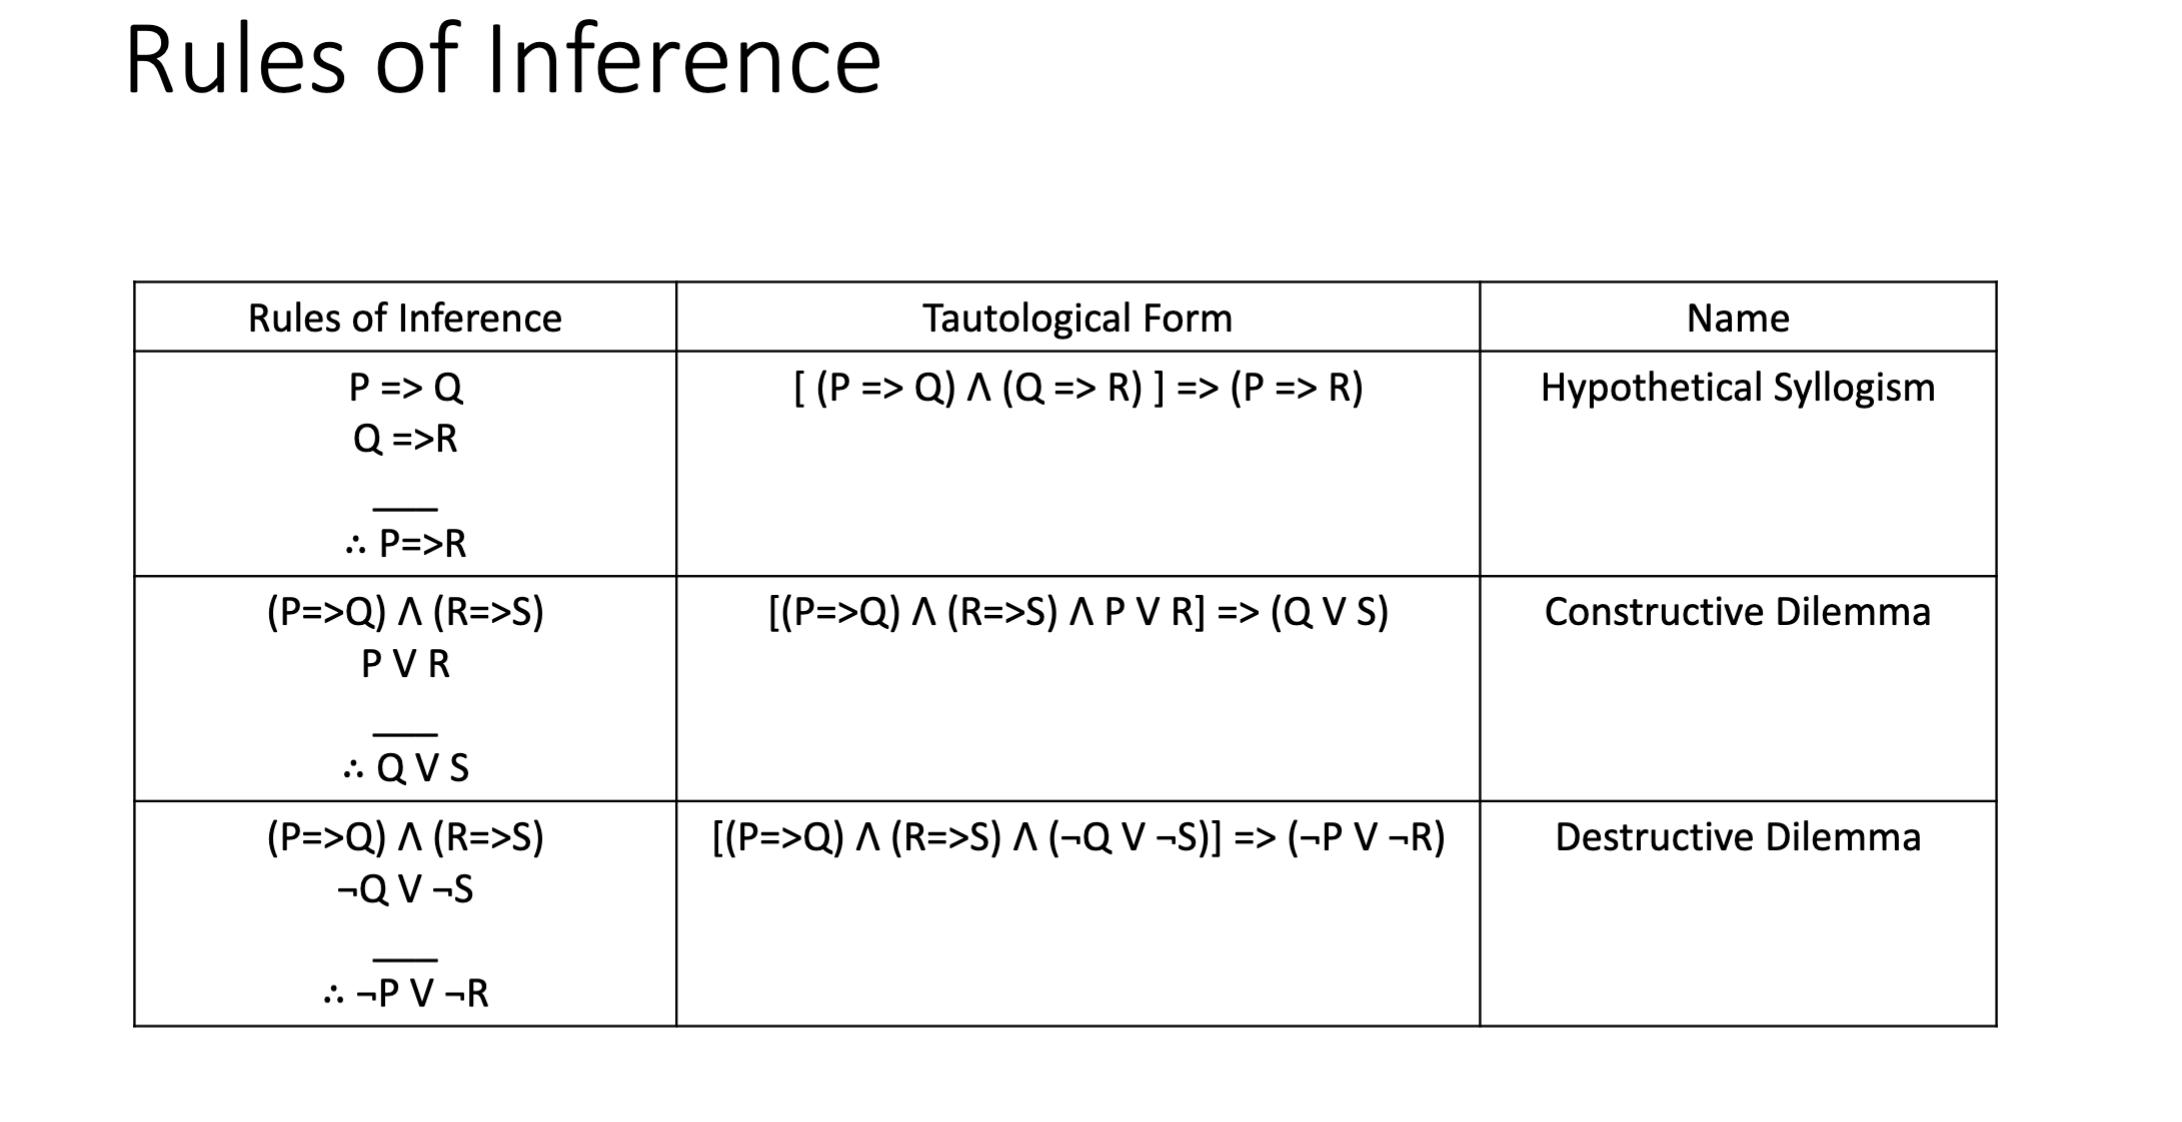 Rules of Inference Rules of Inference P => Q Q =>R .. P=>R (P=>Q) A (R=>S) PVR :. QVS (P=>Q) A (R=>S) -QV-S